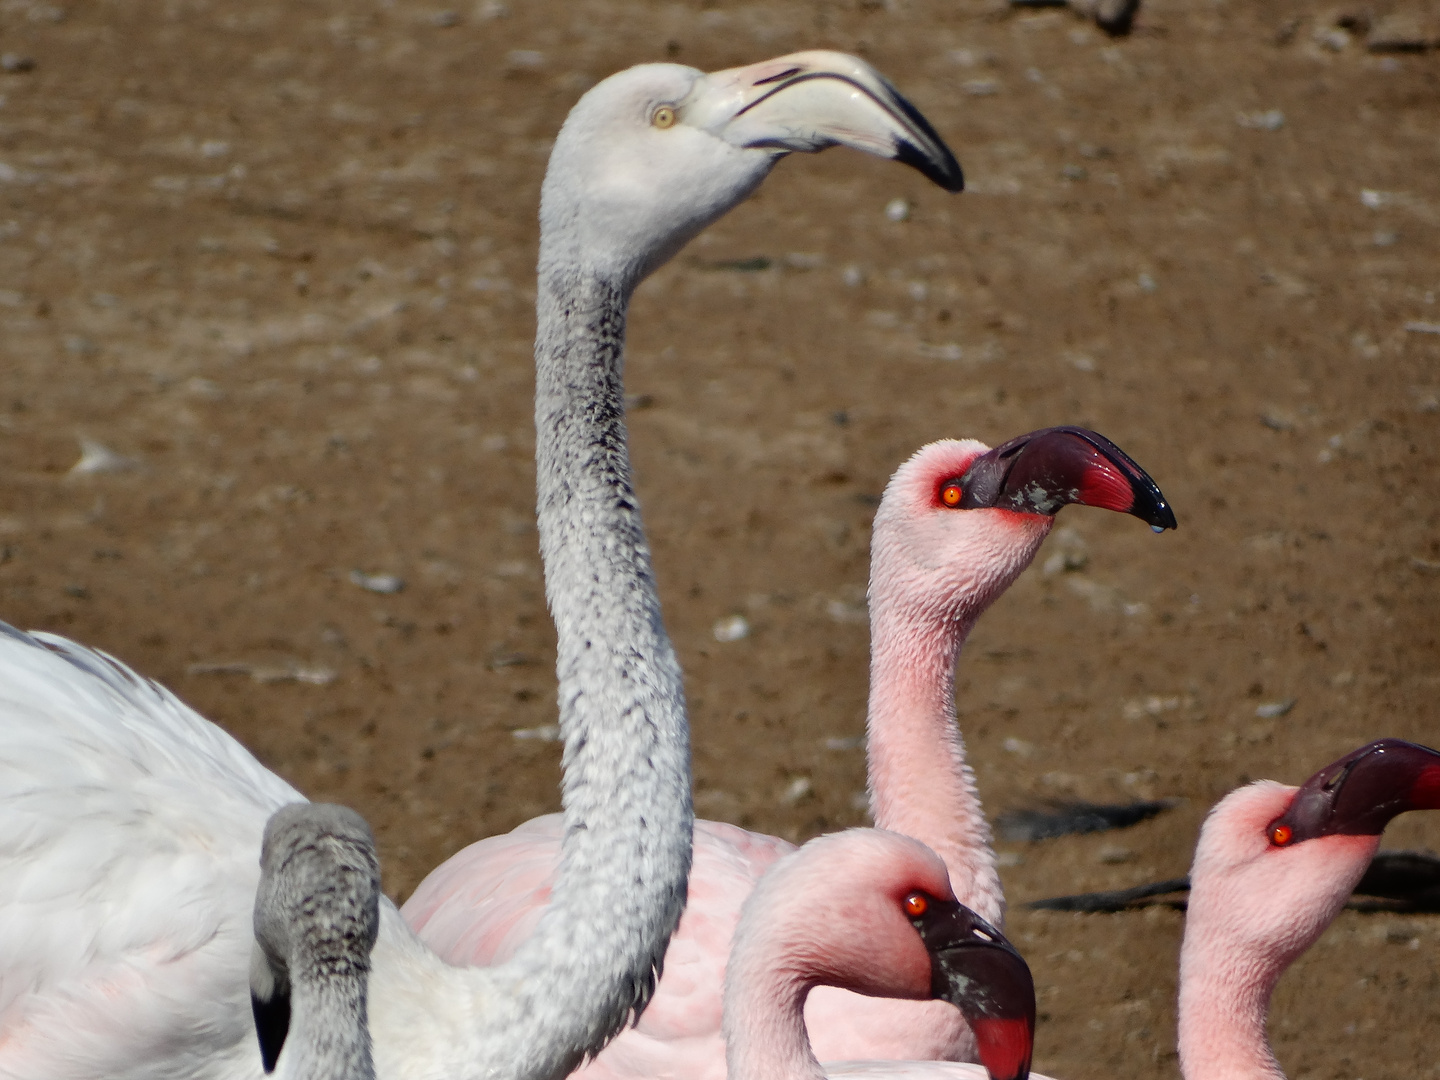 "Greater-and Lesser-Flamingo"